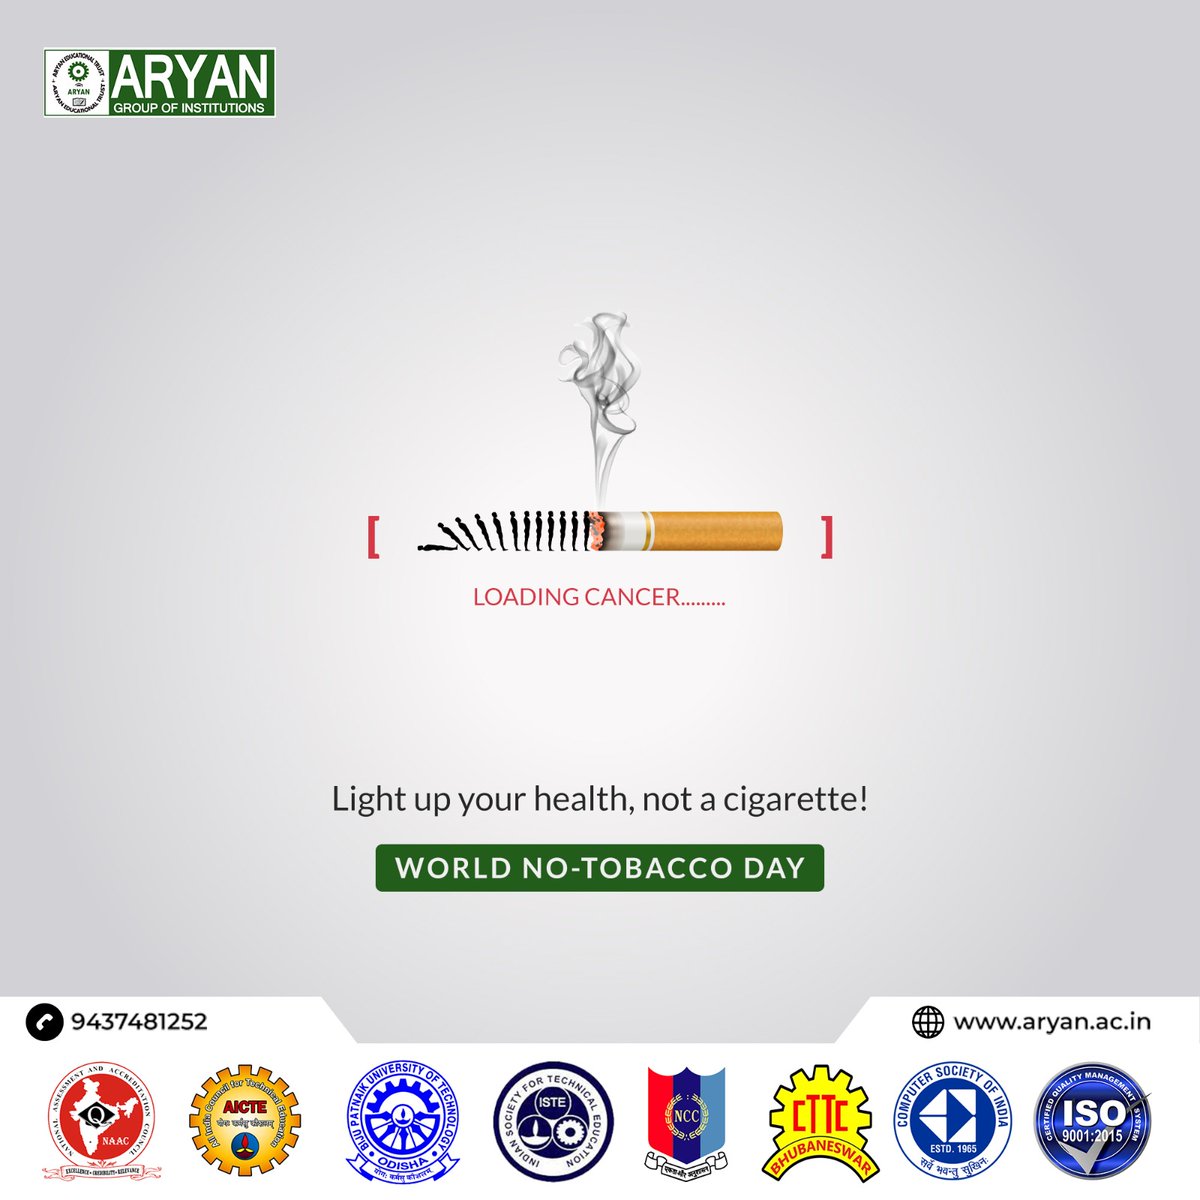 Saying no to tobacco is saying yes to life. On the occasion of World No Tobacco Day let us pledge to stop consuming tobacco and lead a healthy life.  #NoTobaccoDay #aryan #tobaccofreesociety #aryan